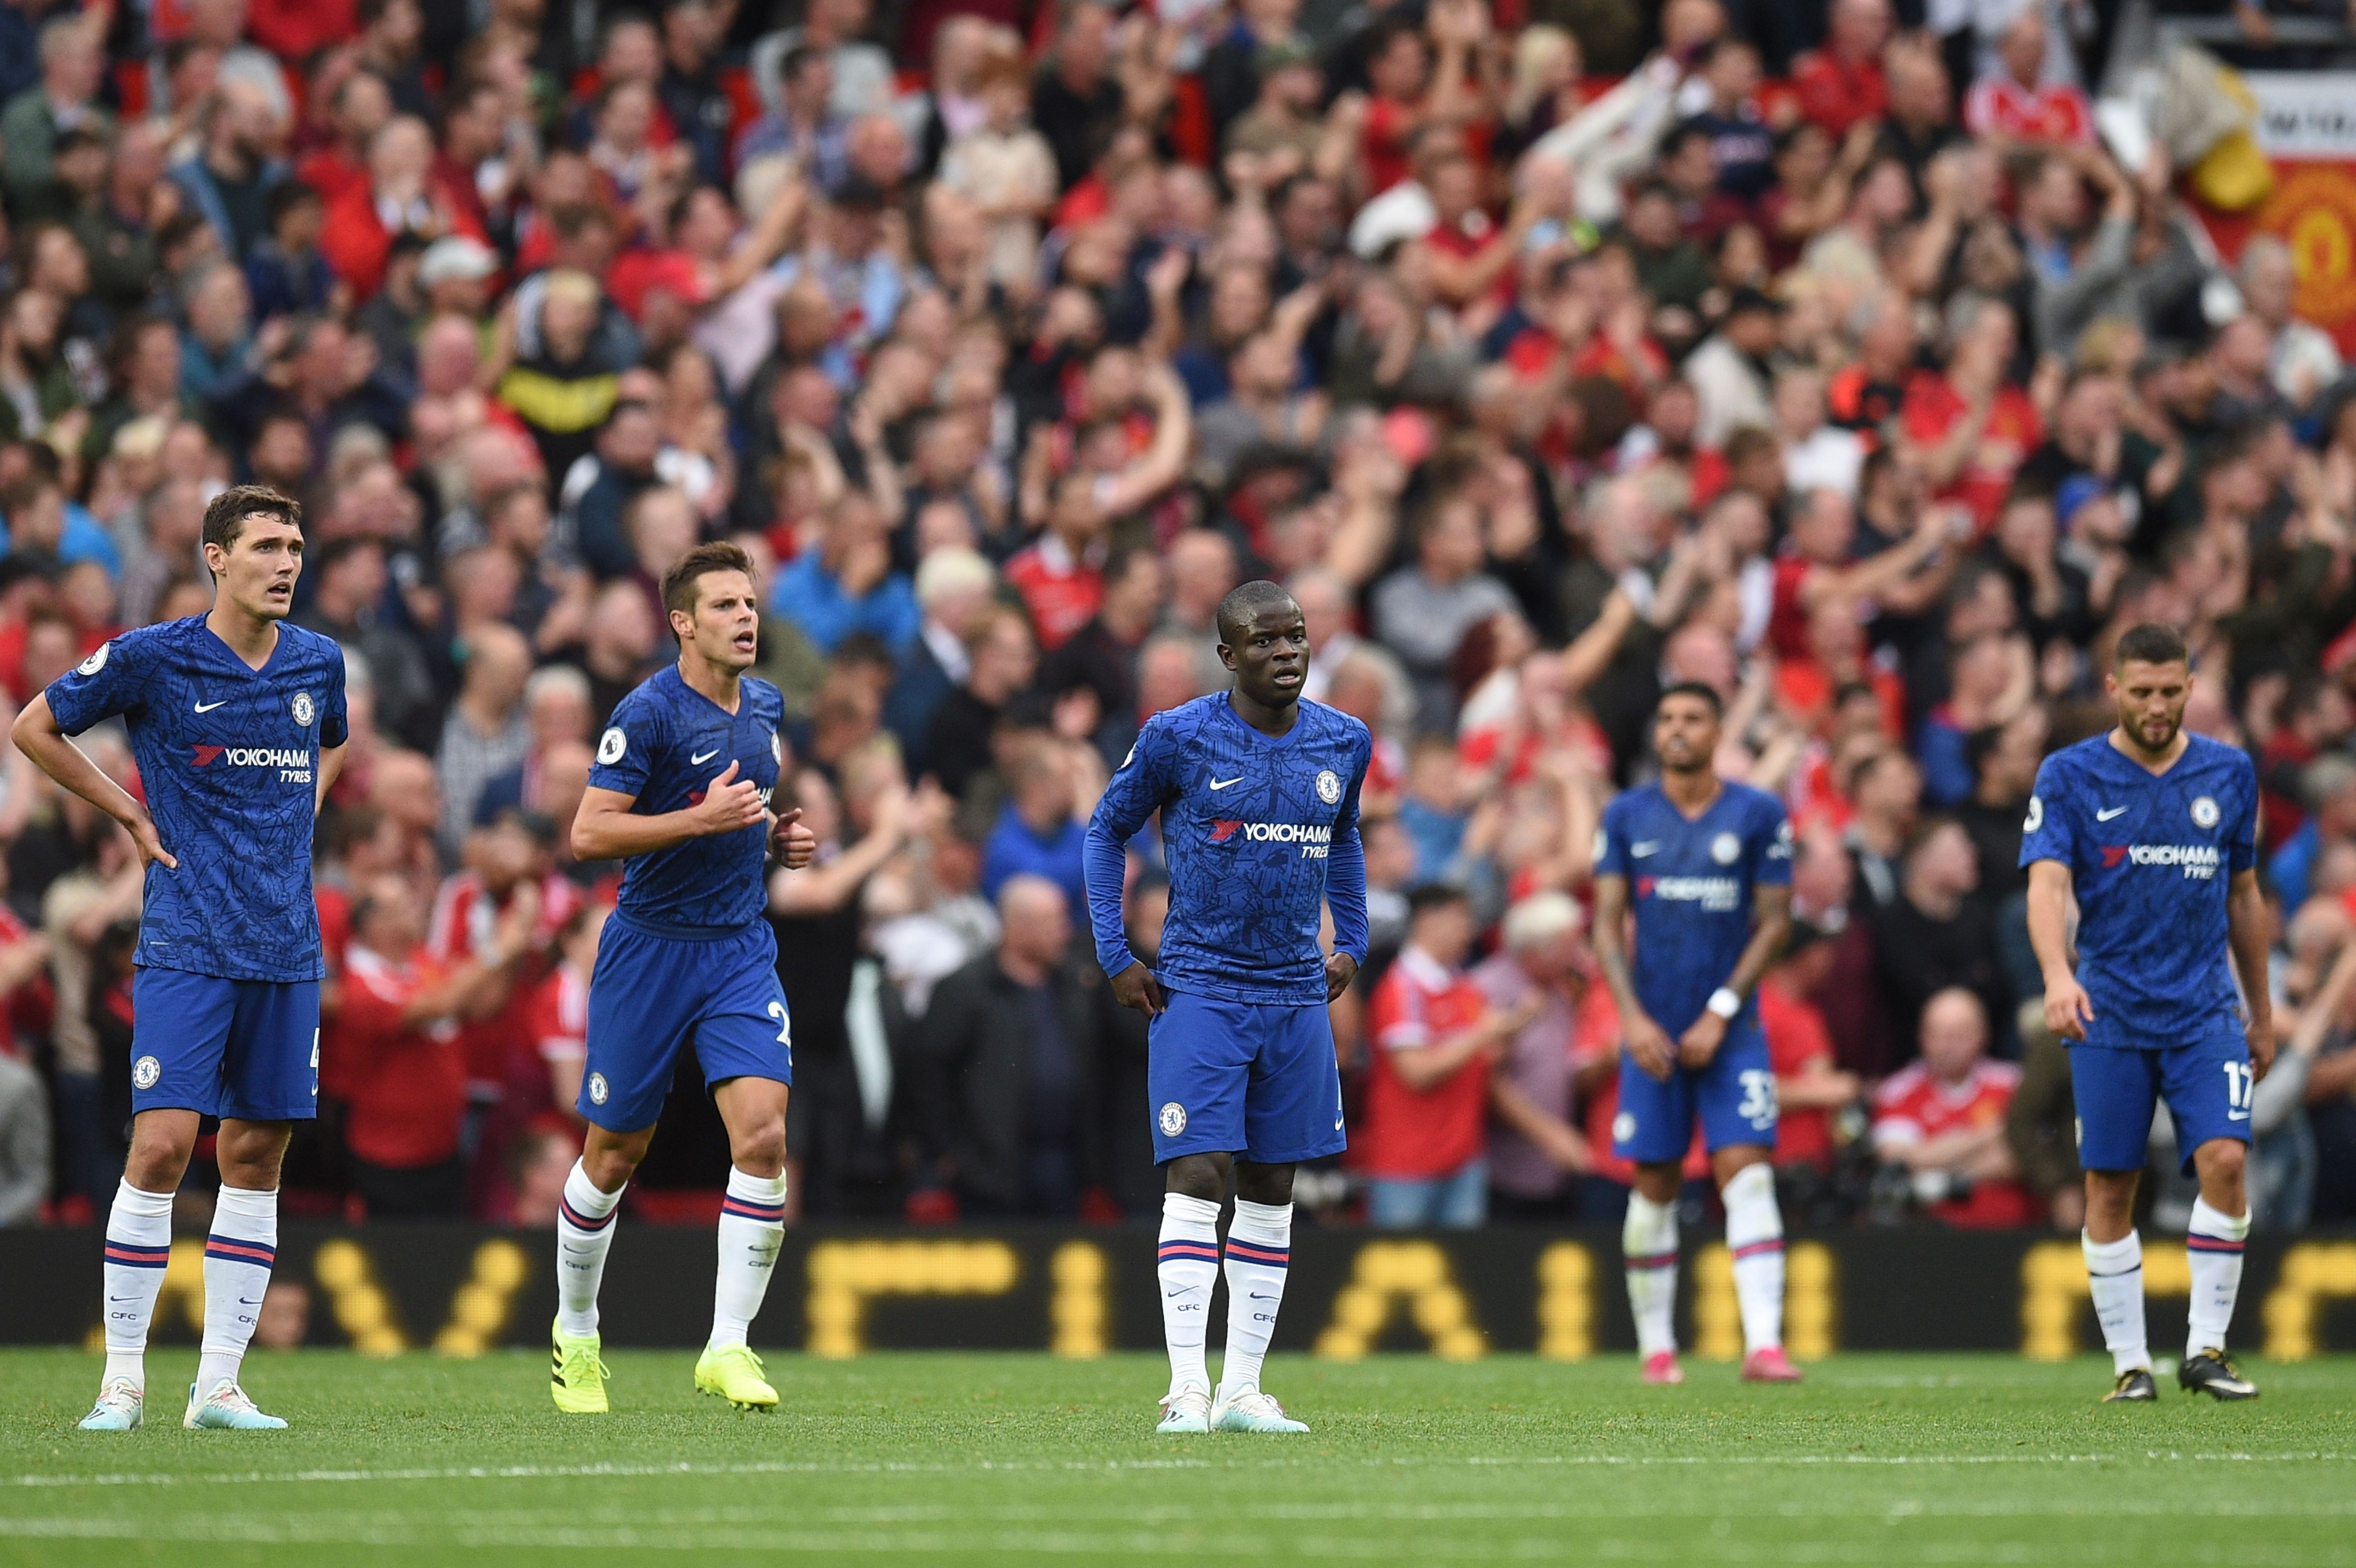 Chelsea players (L-R) Chelsea's Danish defender Andreas Christensen, Chelsea's Spanish defender Cesar Azpilicueta, Chelsea's French midfielder N'Golo Kante, Chelsea's Brazilian-Italian defender Emerson Palmieri and Chelsea's Croatian midfielder Mateo Kovacic reacts to conceding their fourth goal during the English Premier League football match between Manchester United and Chelsea at Old Trafford in Manchester, north west England, on August 11, 2019. - Manchester United won the game 4-0. (Photo by Oli SCARFF / AFP) / RESTRICTED TO EDITORIAL USE. No use with unauthorized audio, video, data, fixture lists, club/league logos or 'live' services. Online in-match use limited to 120 images. An additional 40 images may be used in extra time. No video emulation. Social media in-match use limited to 120 images. An additional 40 images may be used in extra time. No use in betting publications, games or single club/league/player publications. /         (Photo credit should read OLI SCARFF/AFP/Getty Images)